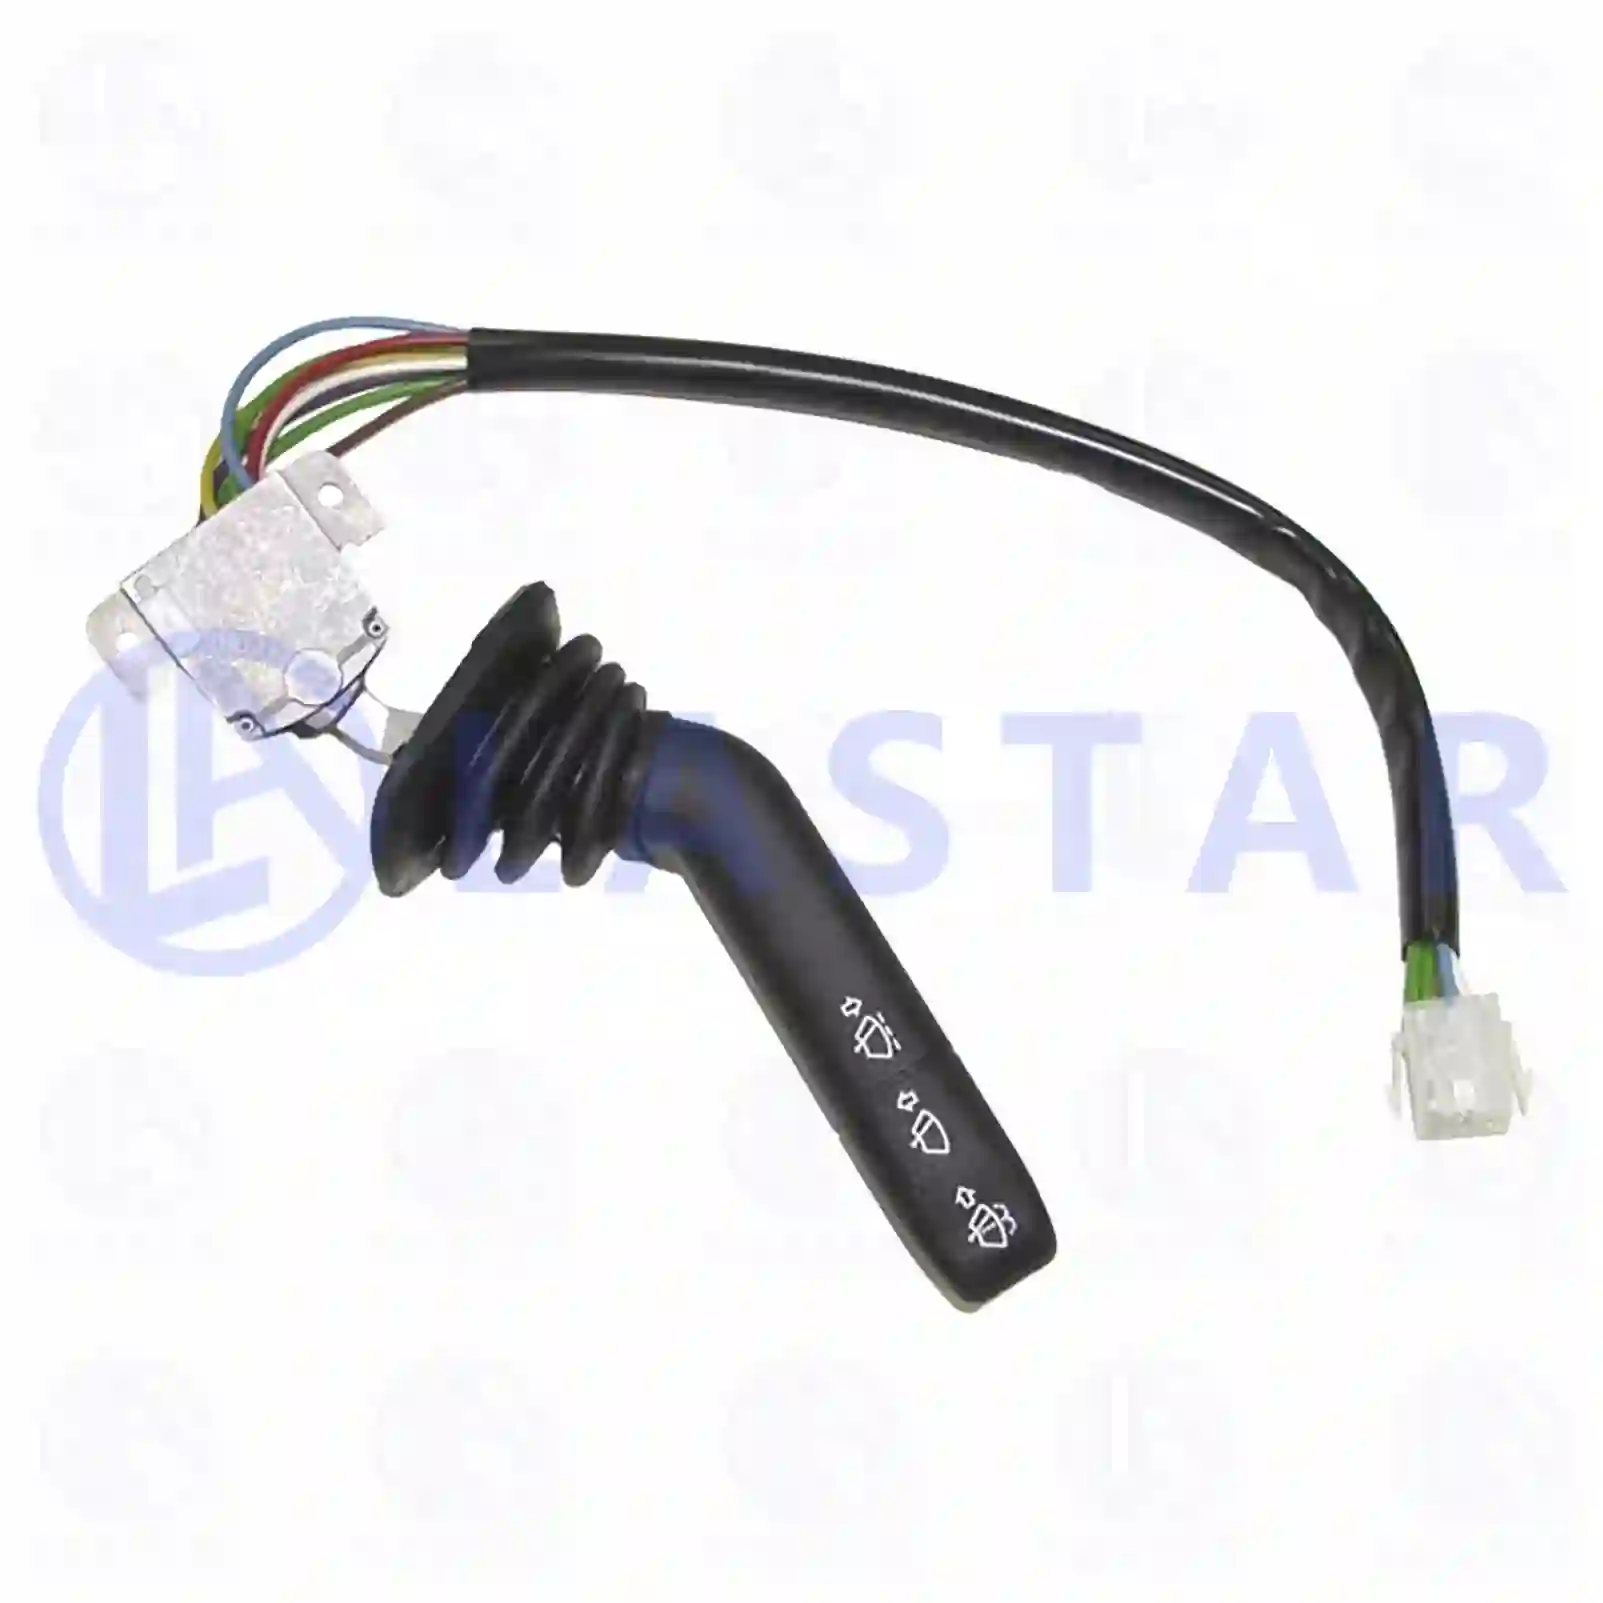  Steering column switch, windscreen wiper || Lastar Spare Part | Truck Spare Parts, Auotomotive Spare Parts